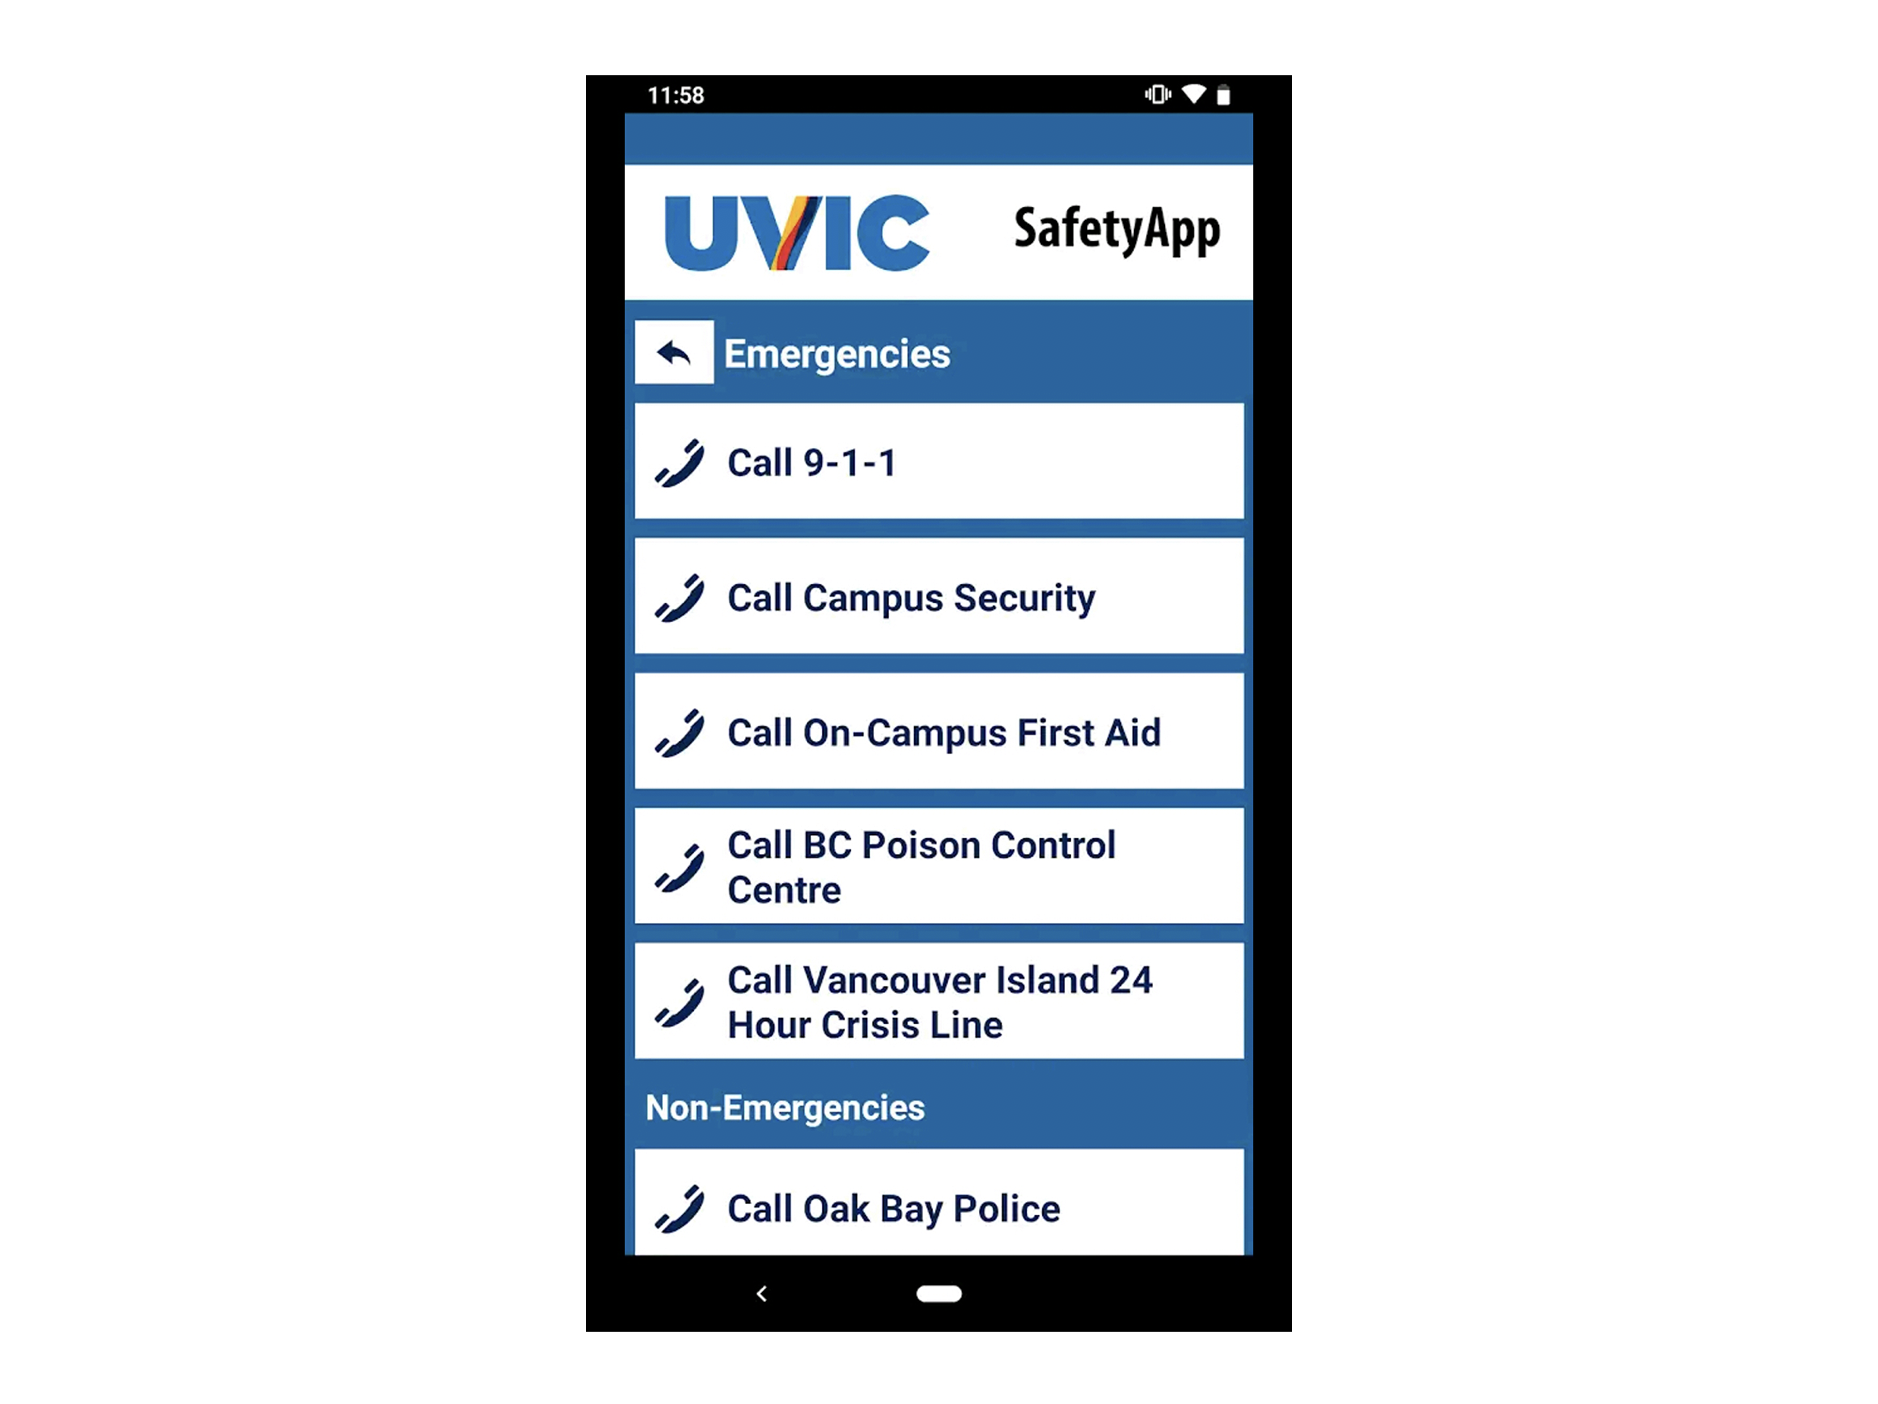 UVic’s new SafetyApp is simple but smart